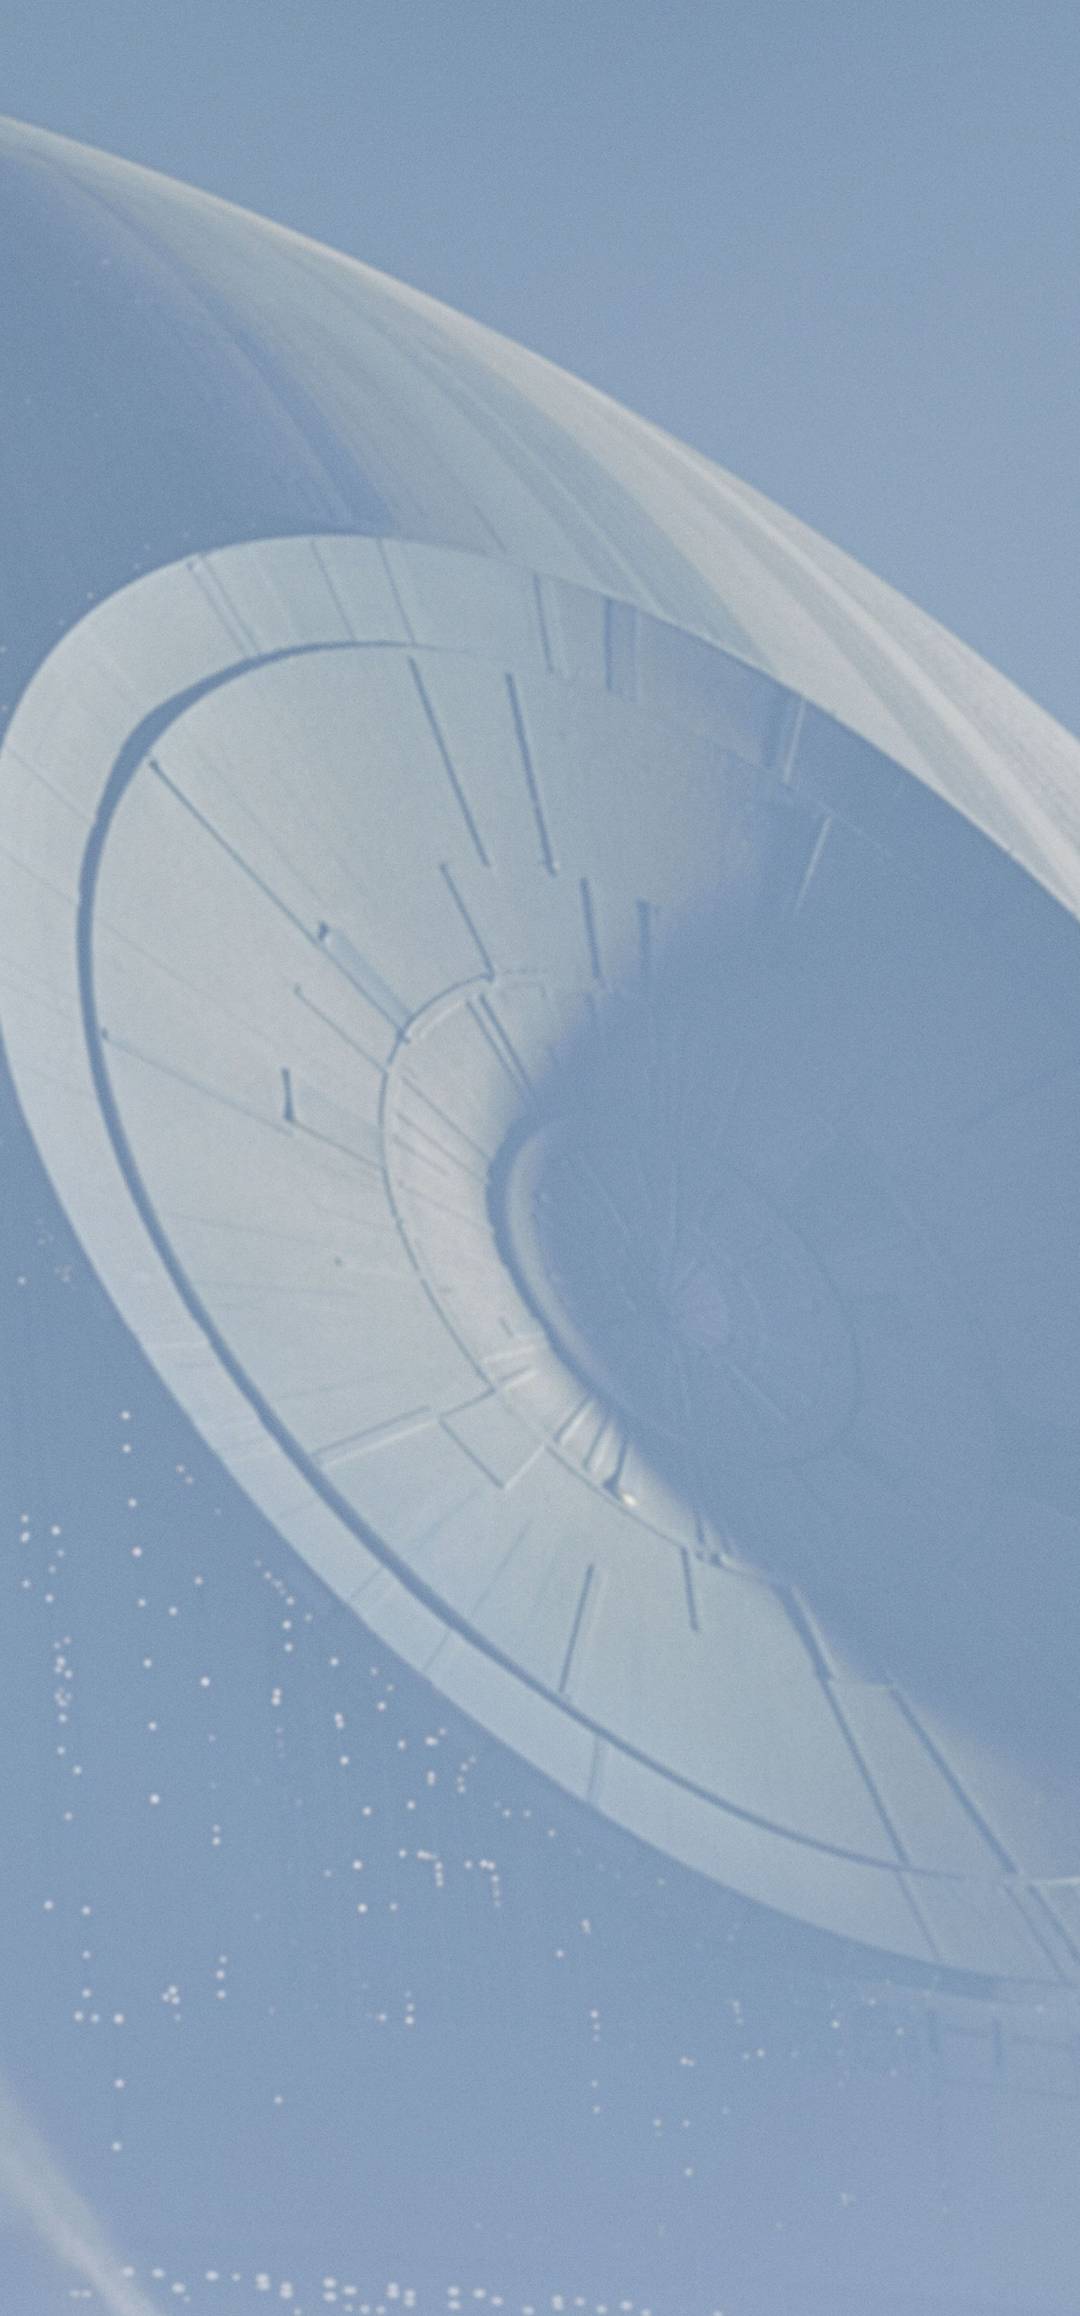 Rogue One A Star Wars Story Spaceship Wallpaper - [1080x2316]